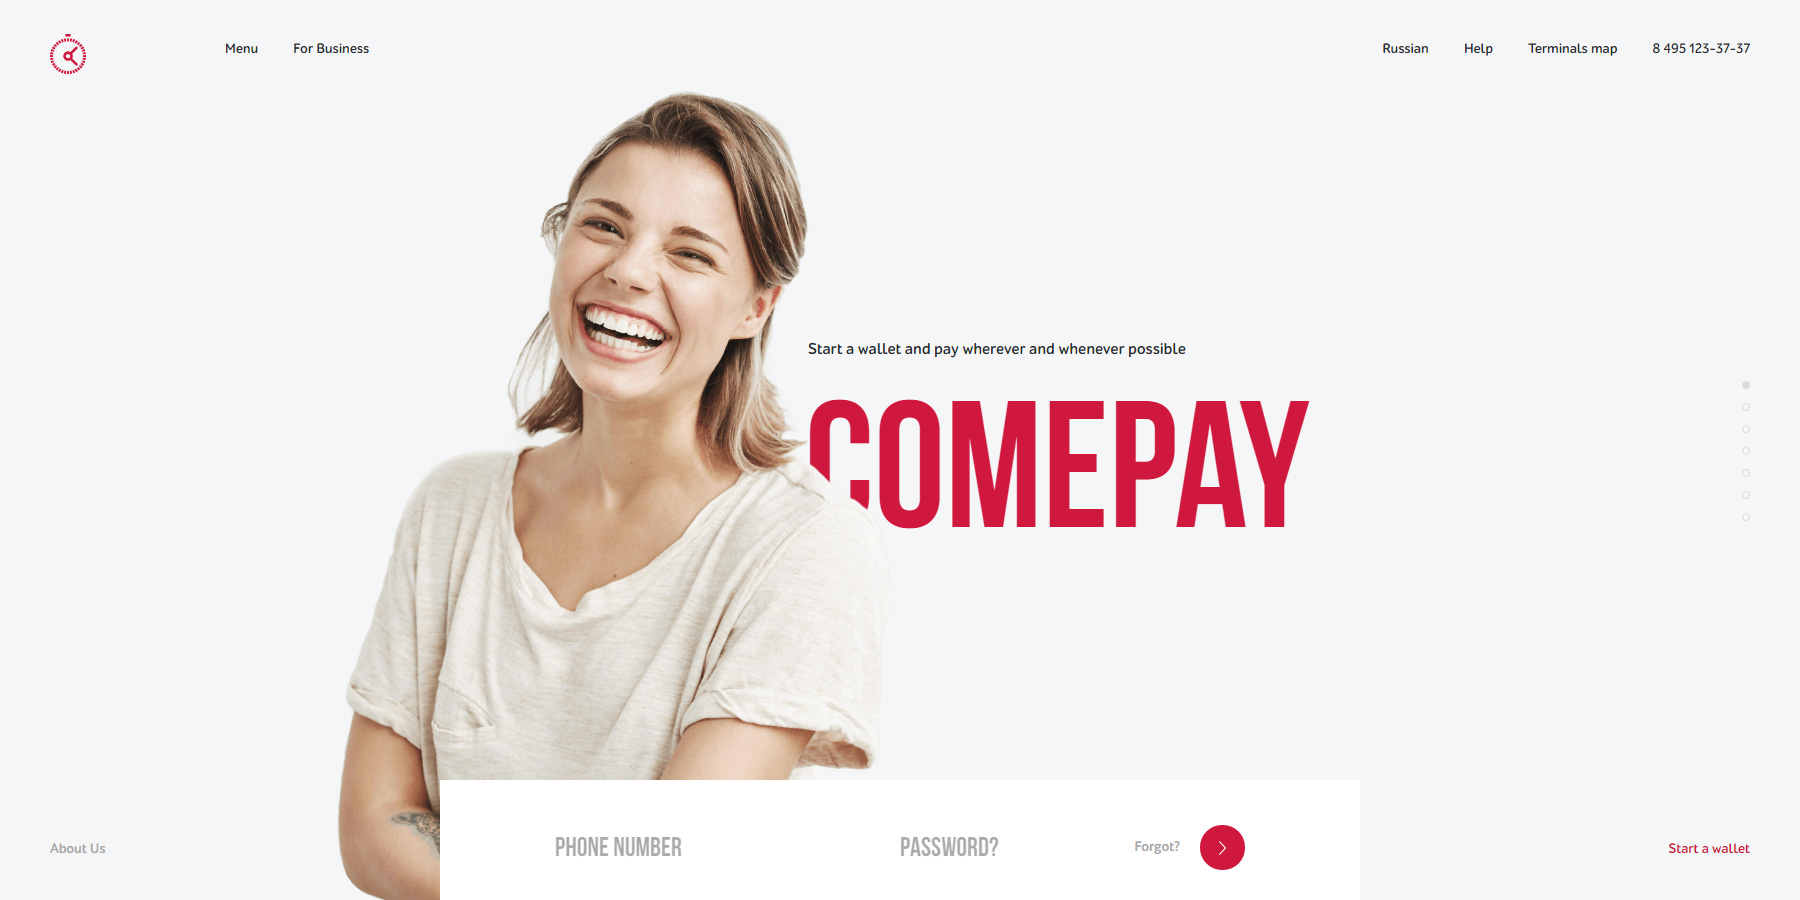 Comepay - Website of the Day